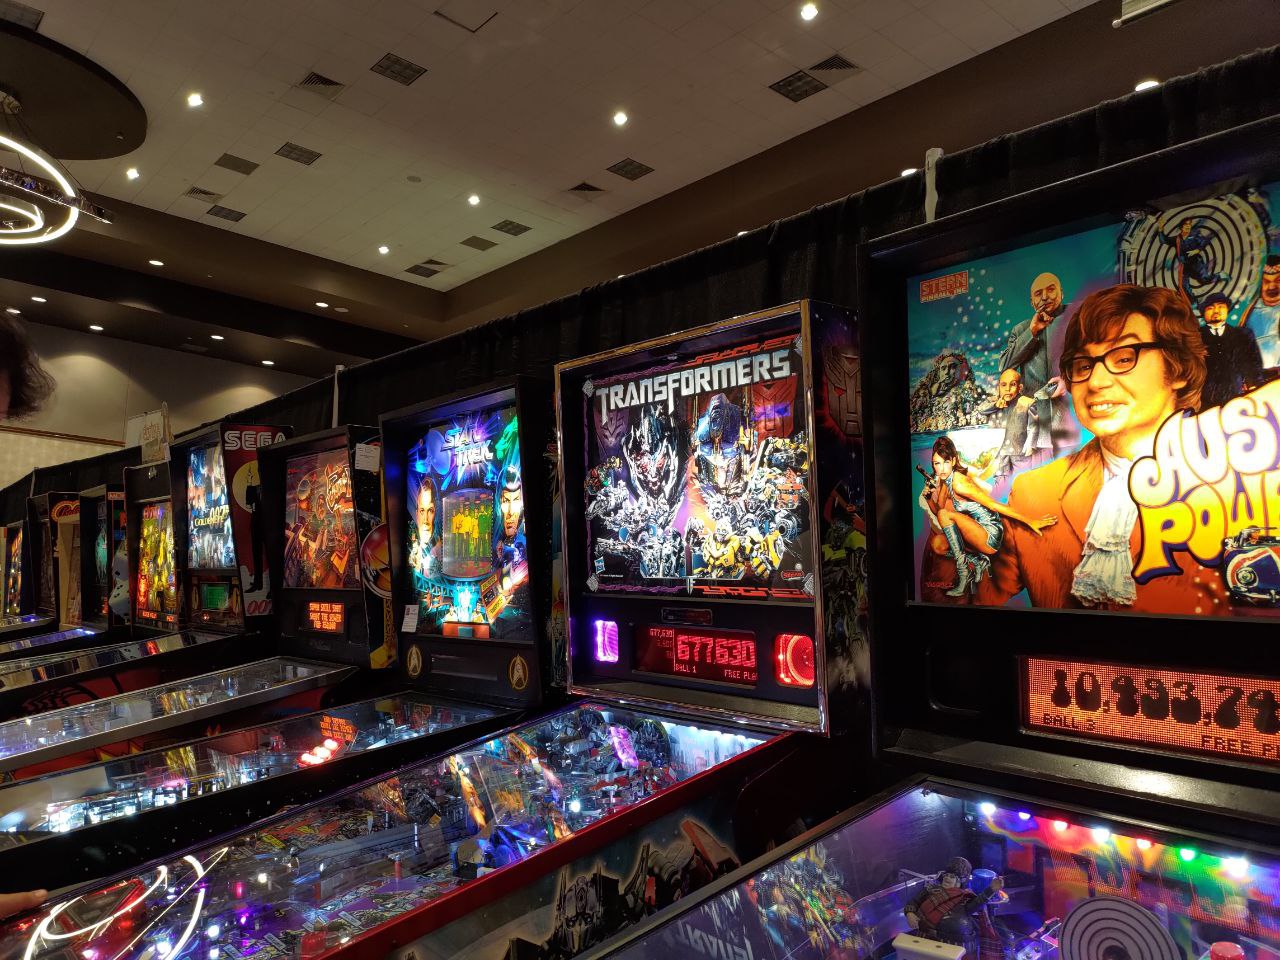 a bunch of pinball machines lined up in a row. Many of the machines are based on popular entertainment franchises, such as Austin Powers, Star Trek, and Transformers.